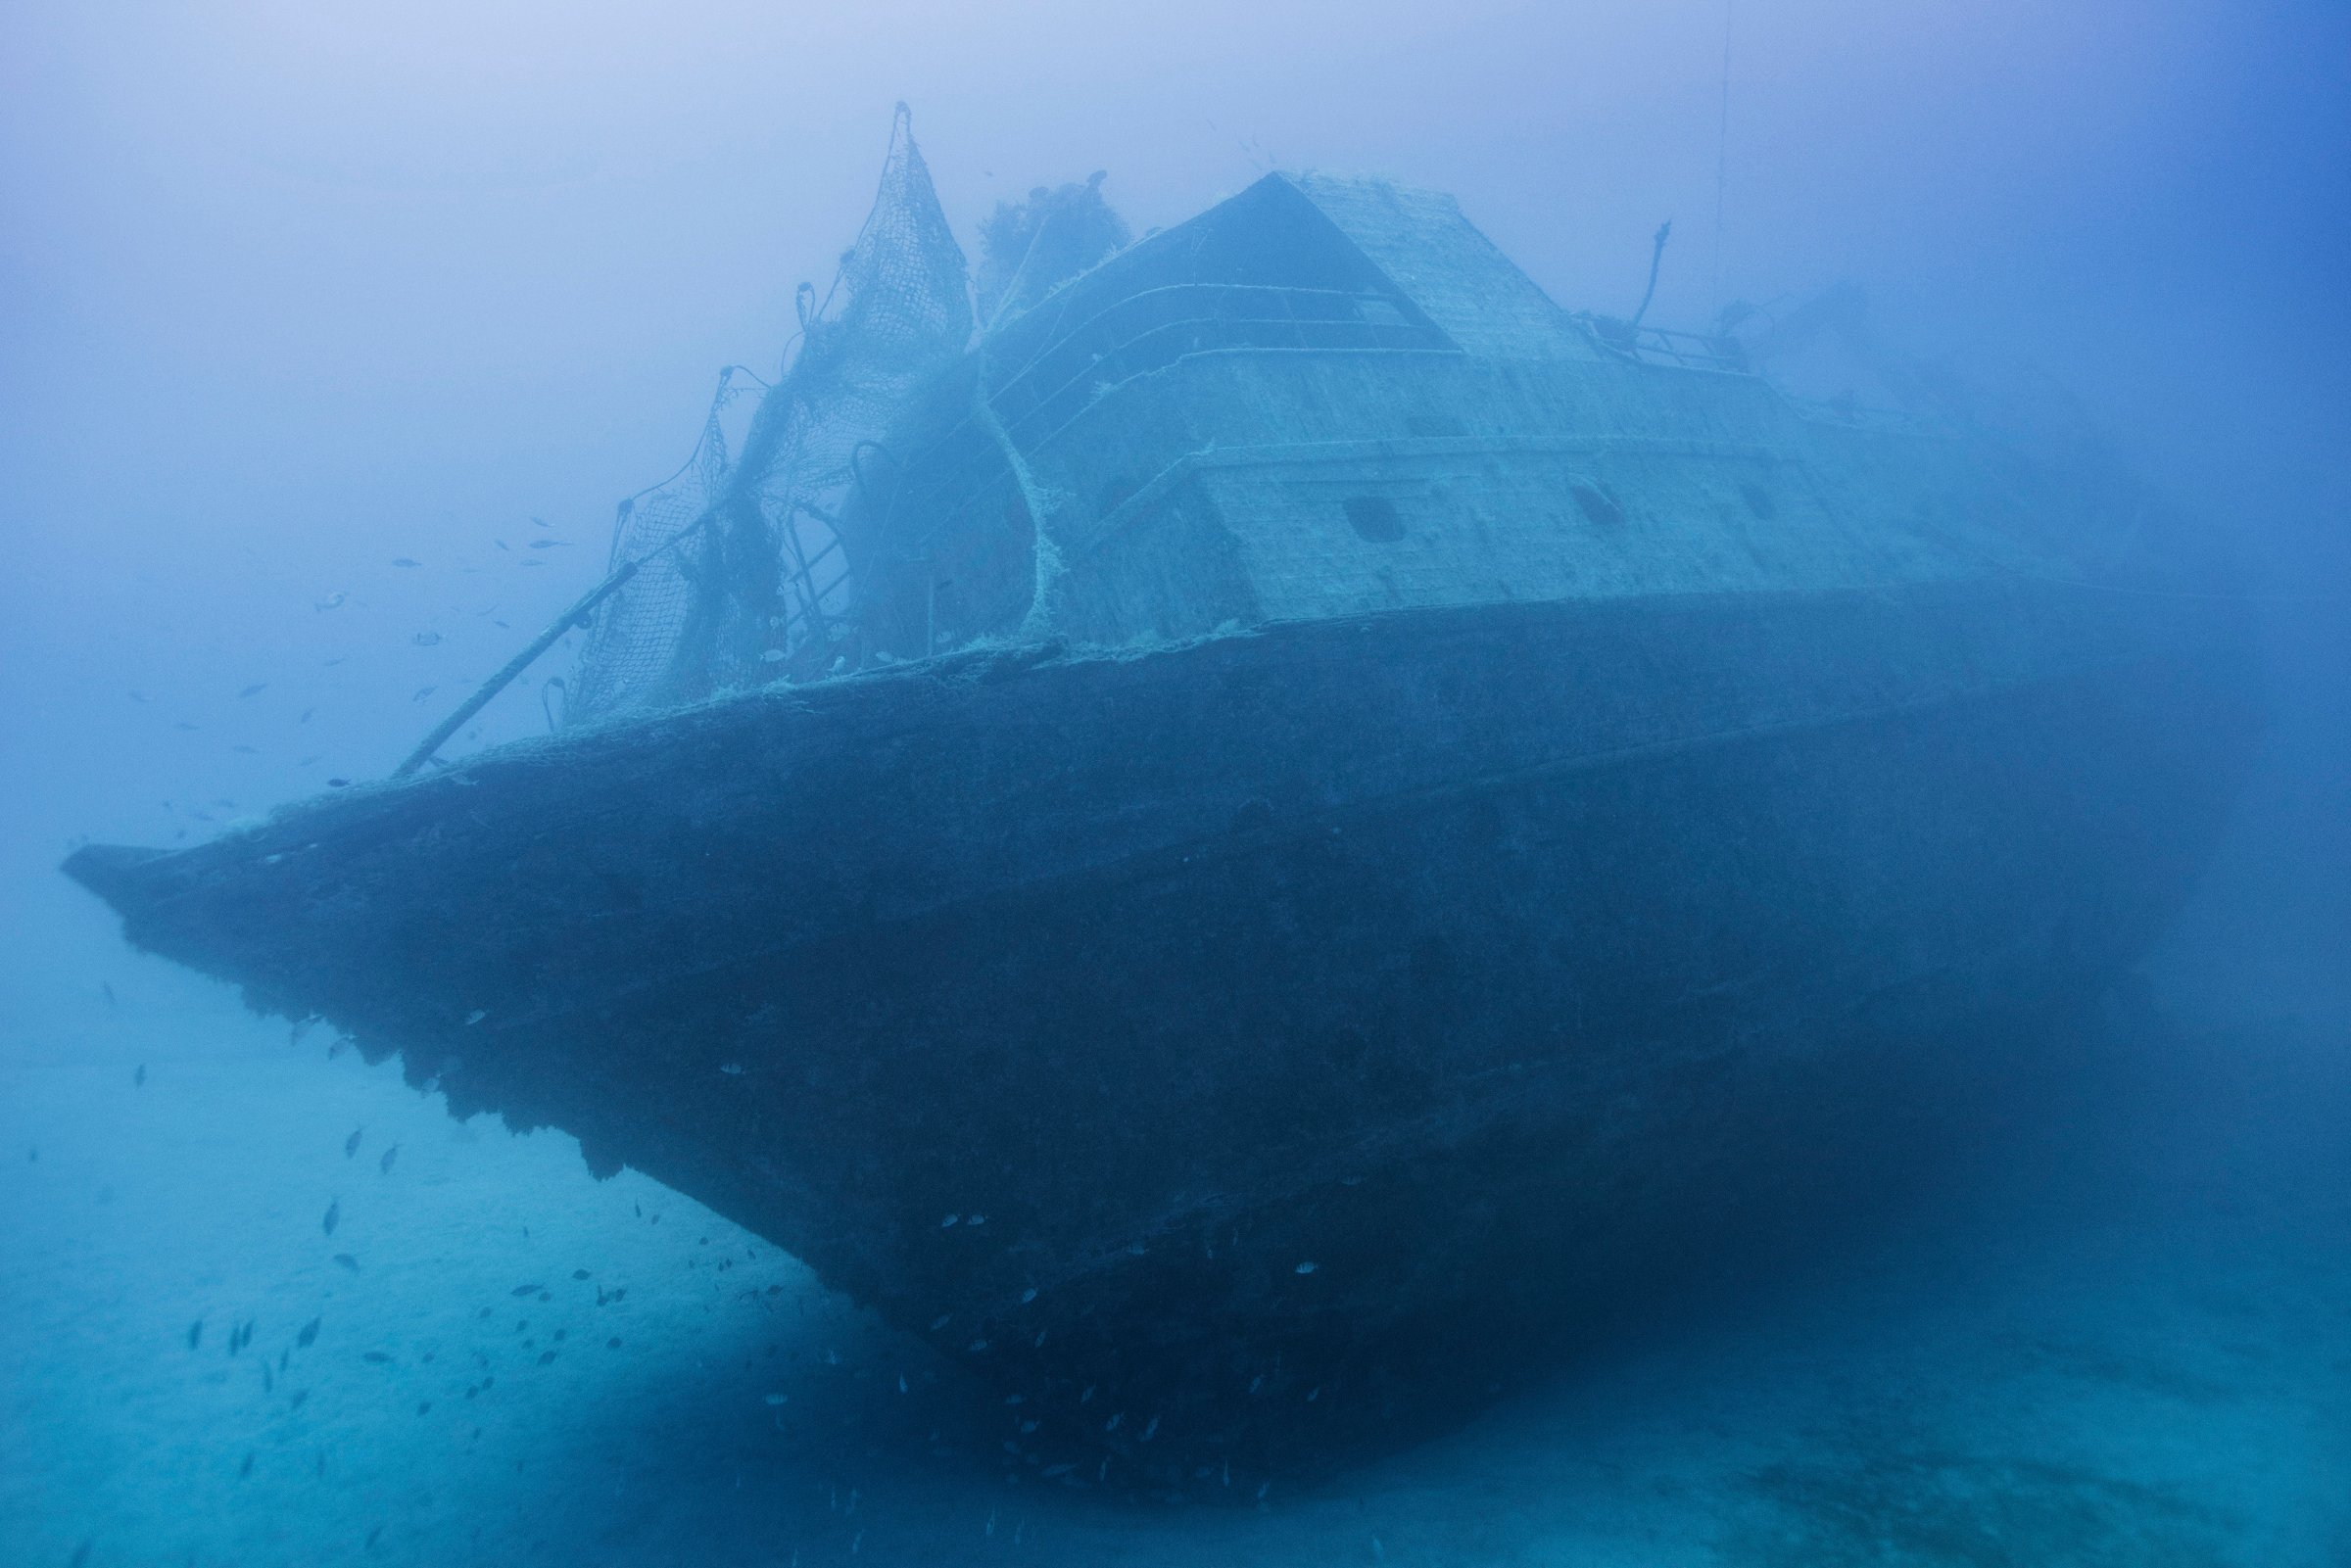 The shipwreck of the 66-foot-long fishing boat that sank off the coast of Lampedusa, Italy, lies at a depth of 164 ft. on the seabed, on Sept. 22, 2014. The tragedy that happened a year ago on Oct. 3, 2013 killed 366 migrants from North Africa.